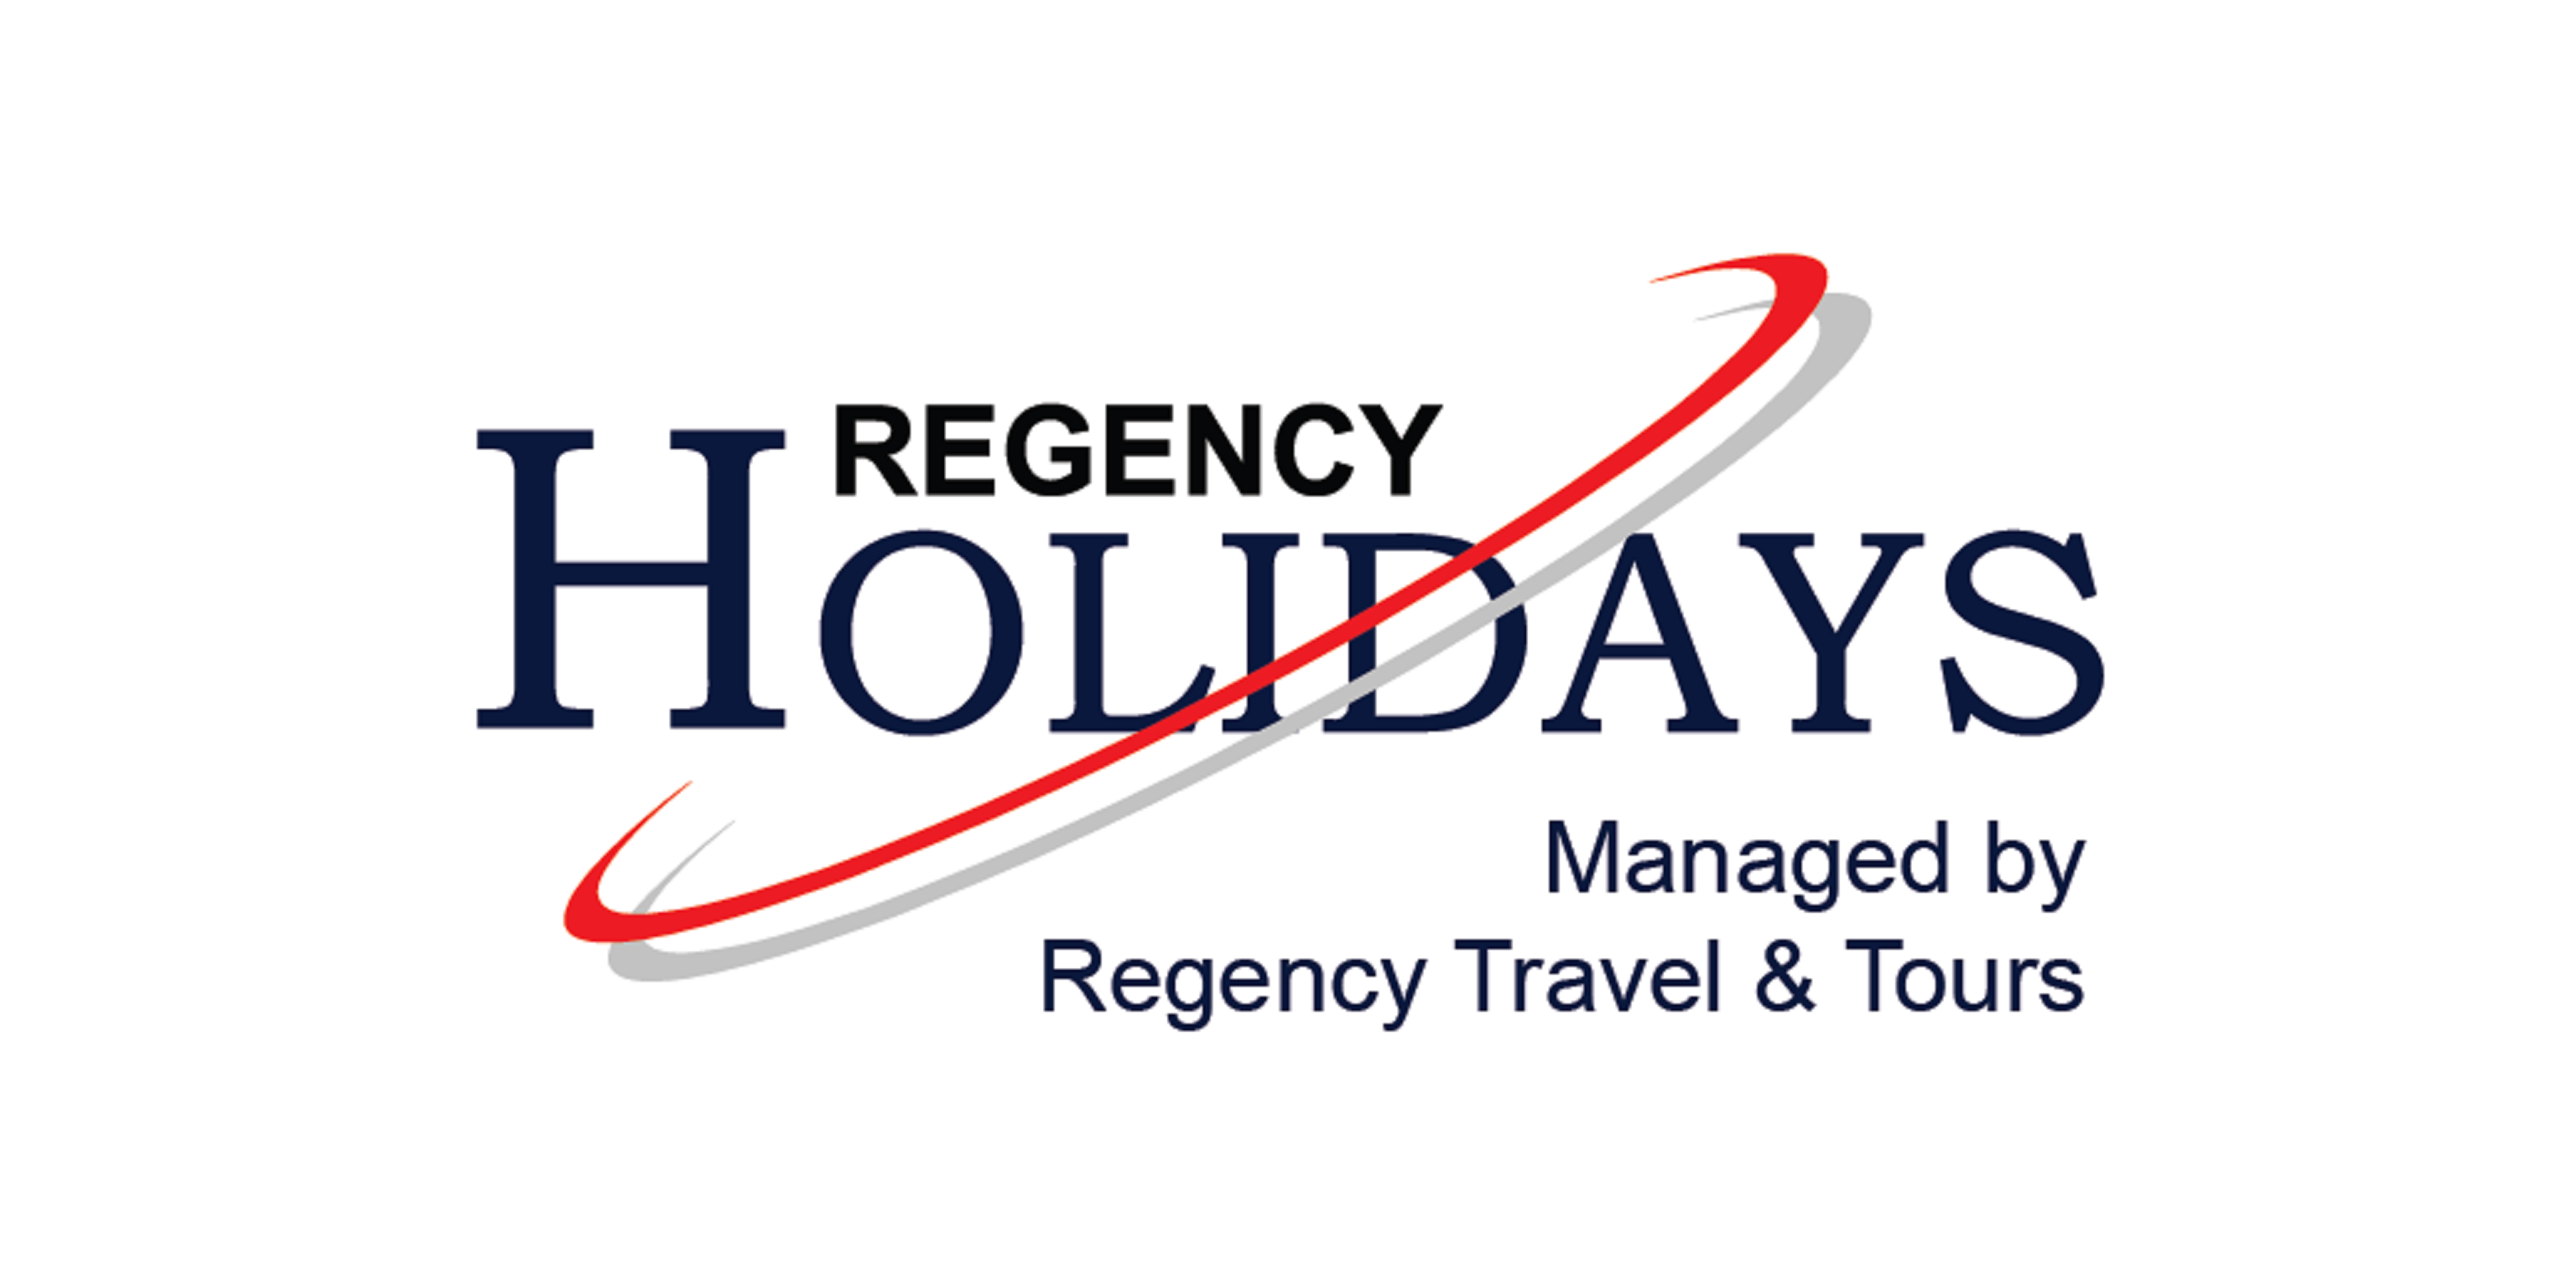 Qatar based DMC Regency Travel & Tours appoints Red Dot Representations as its India market representative